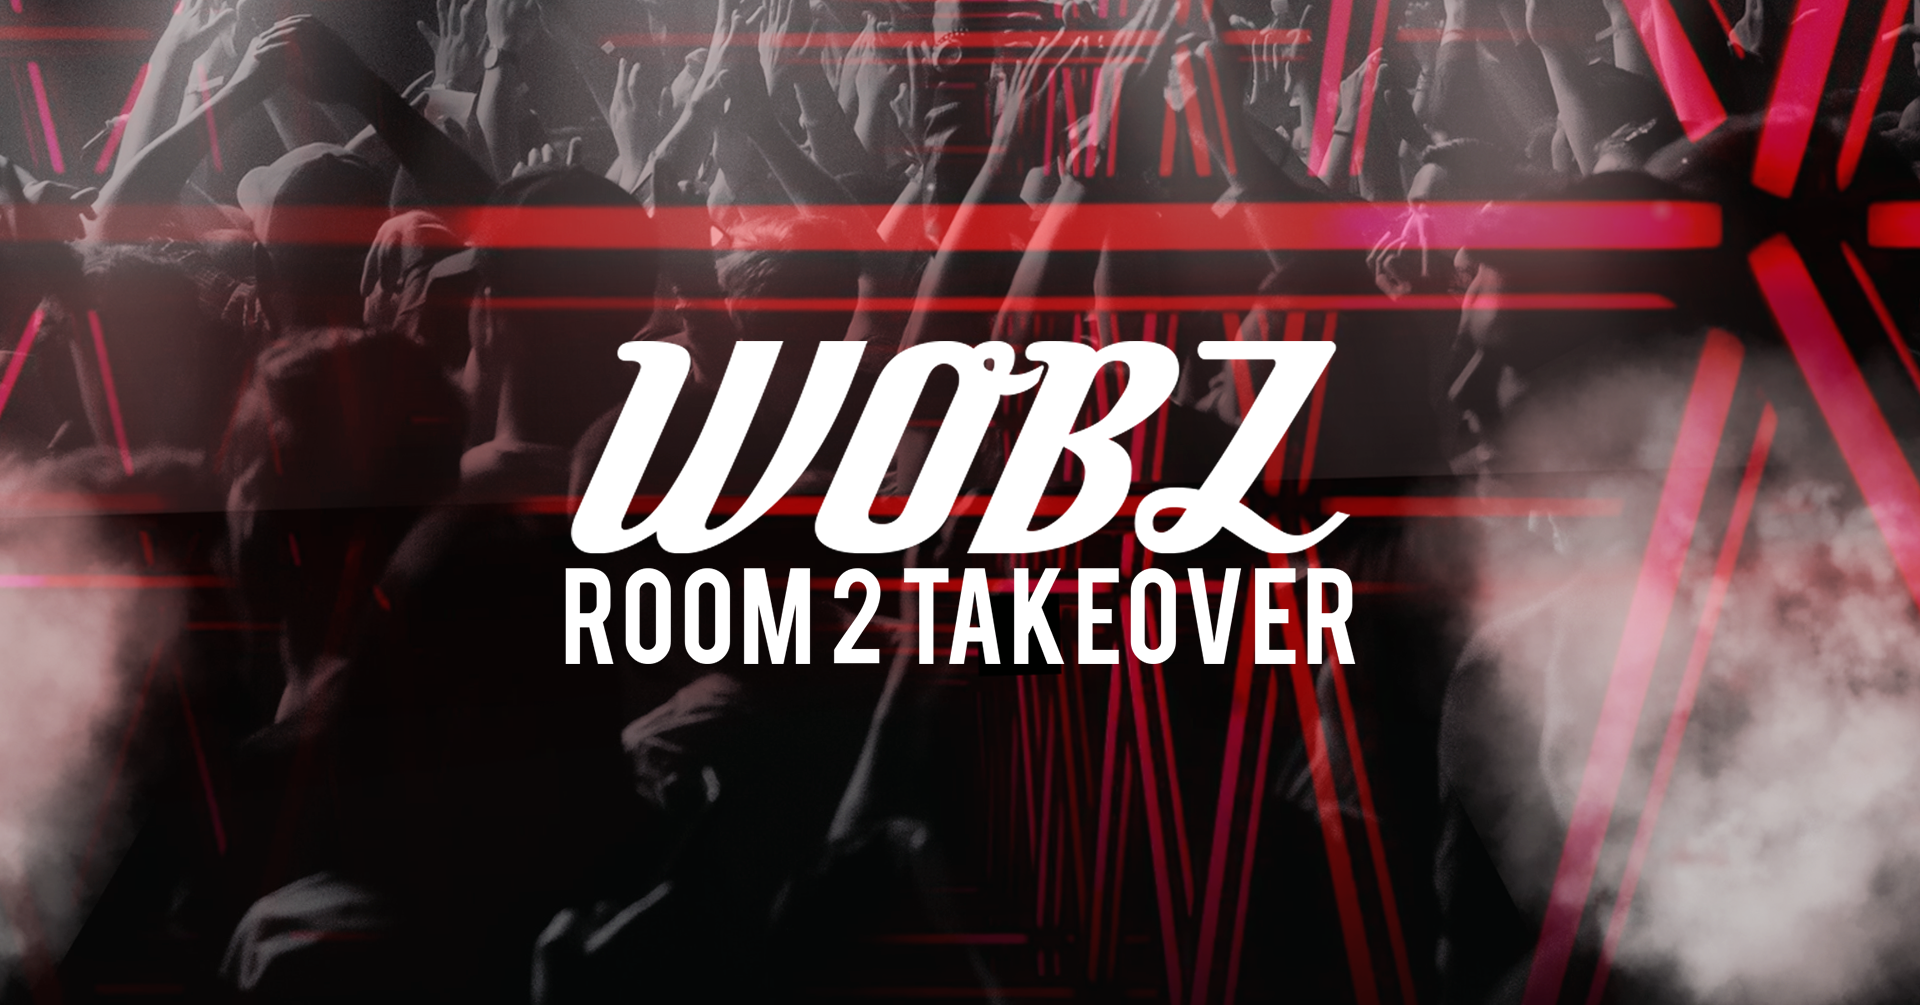 WOBZ [Room 2 Takeover]  – Saturday 3rd August